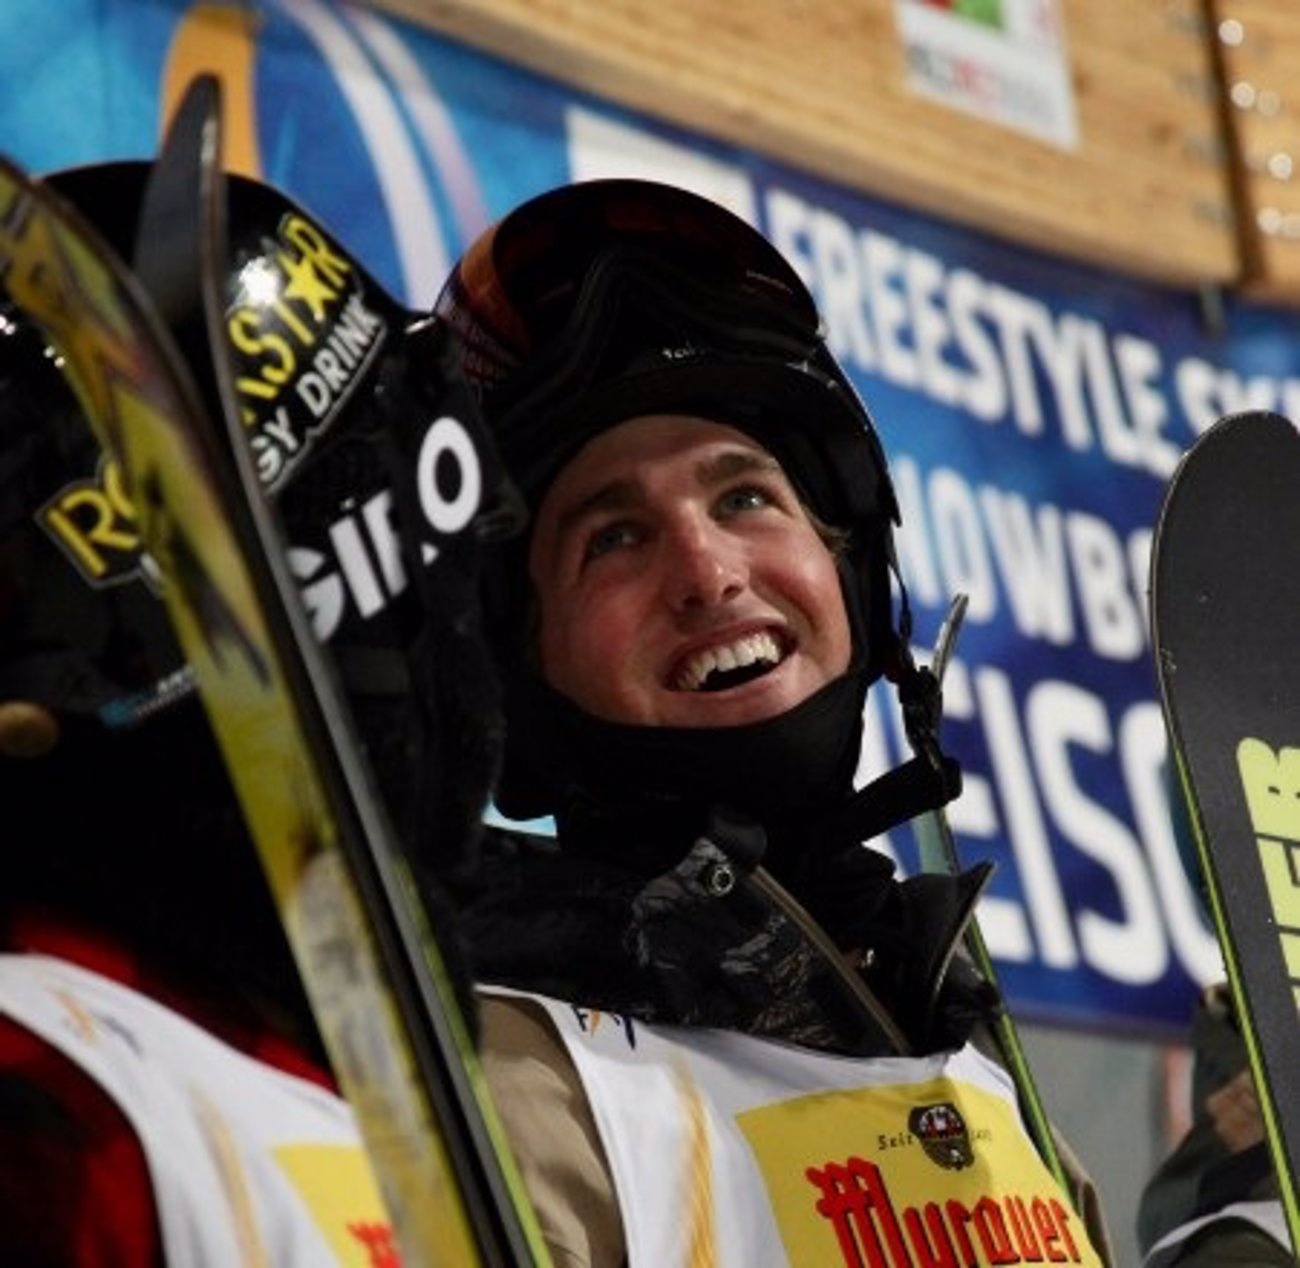 Former halfpipe world champion Kyle Smaine killed in avalanche in Japan